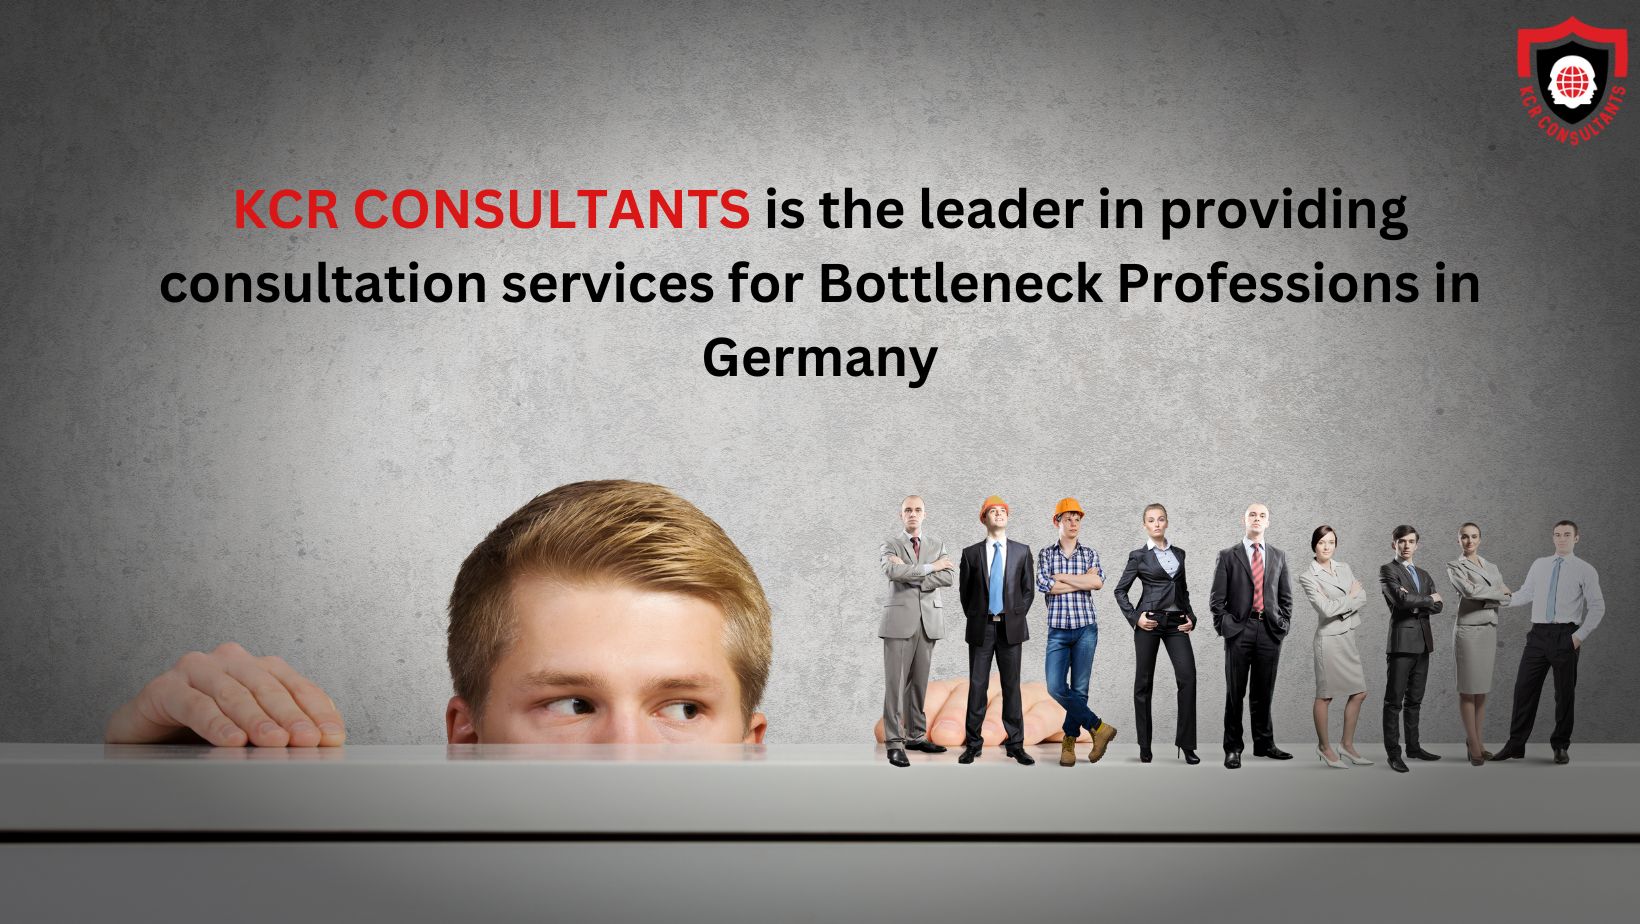 Bottleneck Professions in Germany - KCR CONSULTANTS - Contact us